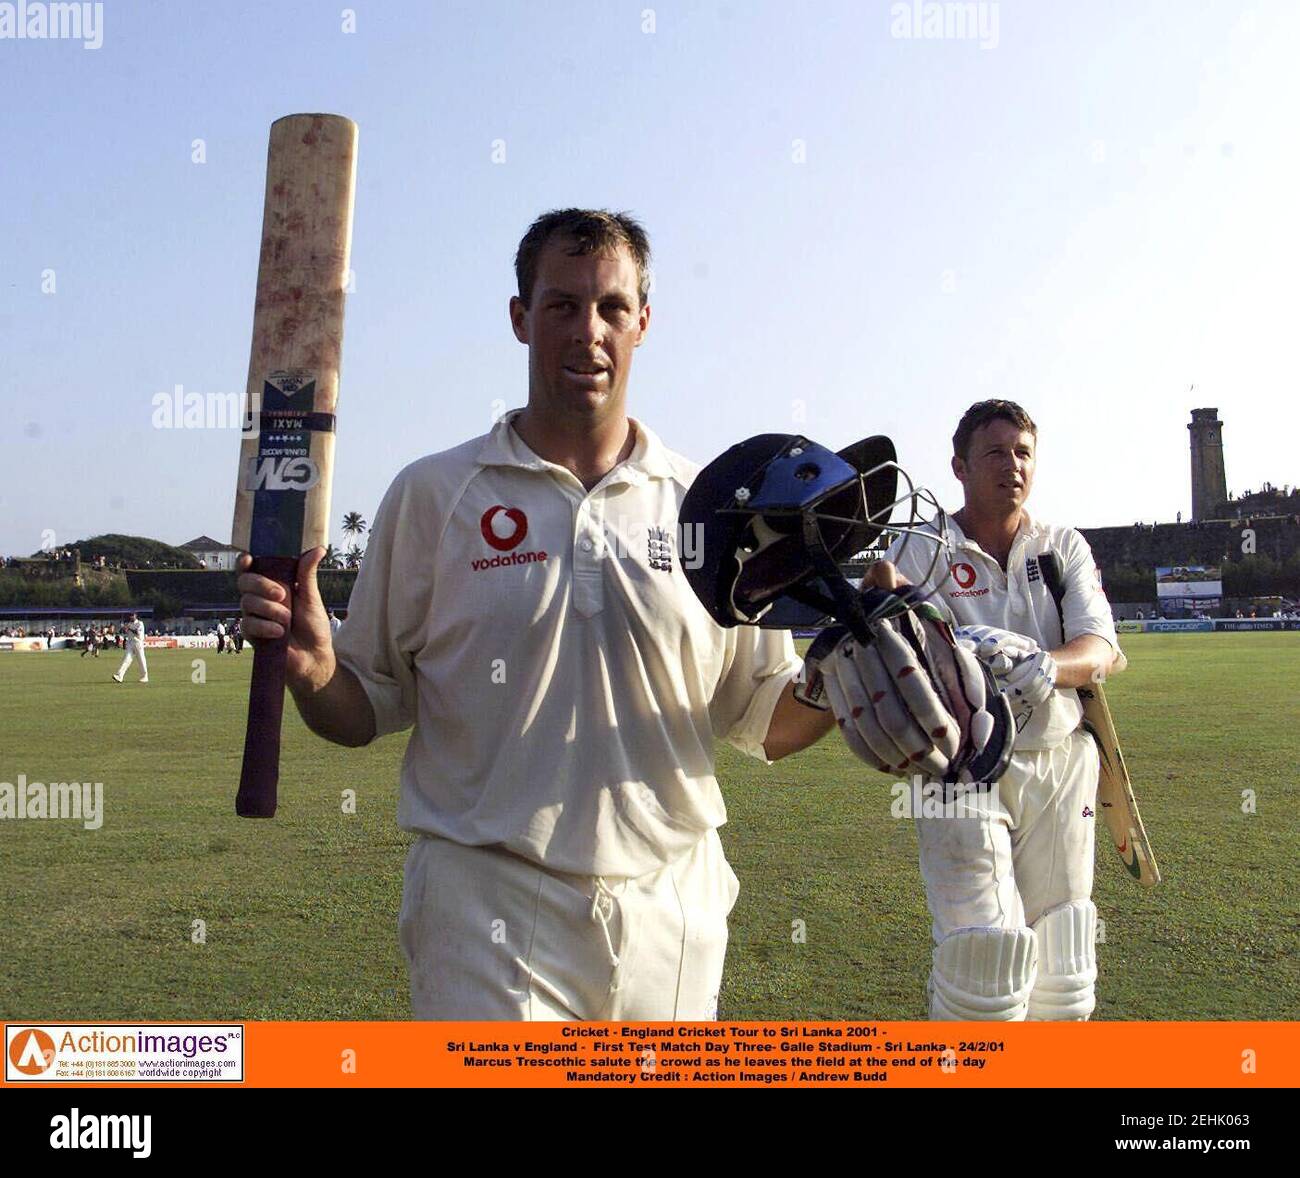 Cricket - England Cricket Tour to Sri Lanka 2001 -   Sri Lanka v England -  First Test Match Day Three   - Galle Stadium - Sri Lanka - 24/2/01  Marcus Trescothick  salute the crowd as he leaves the field at the end of the day   Mandatory Credit : Action Images / Andrew Budd  Trescothick Stock Photo